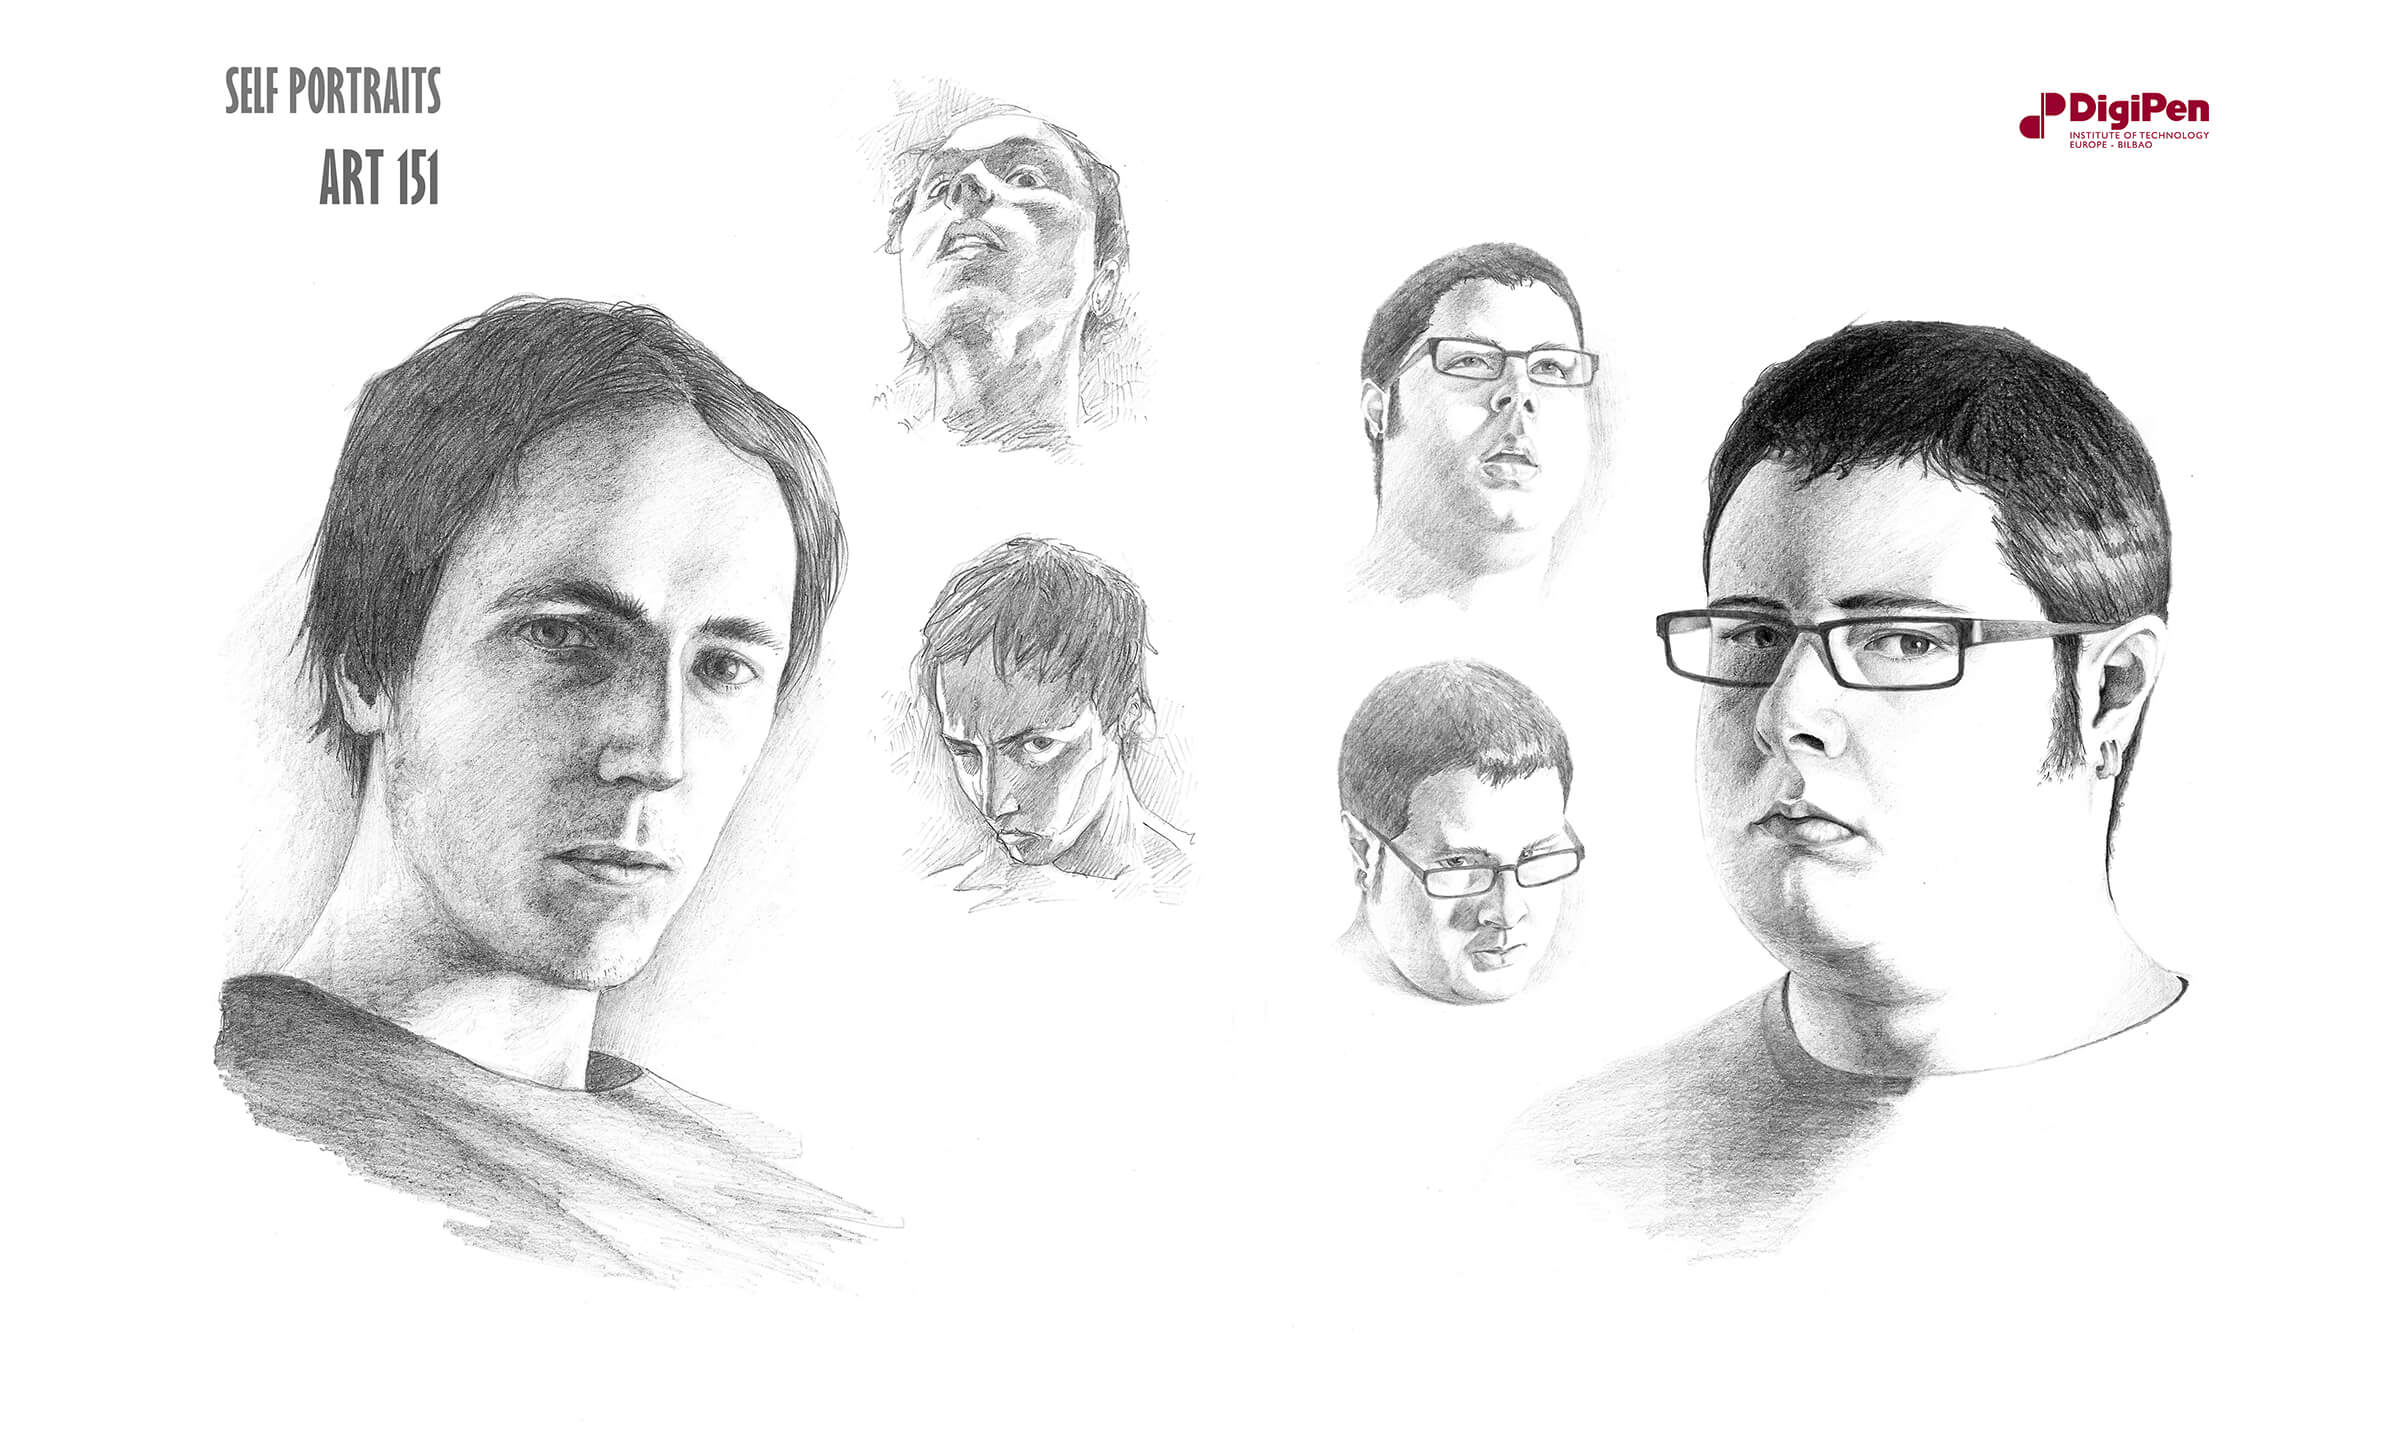 Black-and-white self portraits of two male artists&#039; faces from different angles, one wears glasses and two earrings.